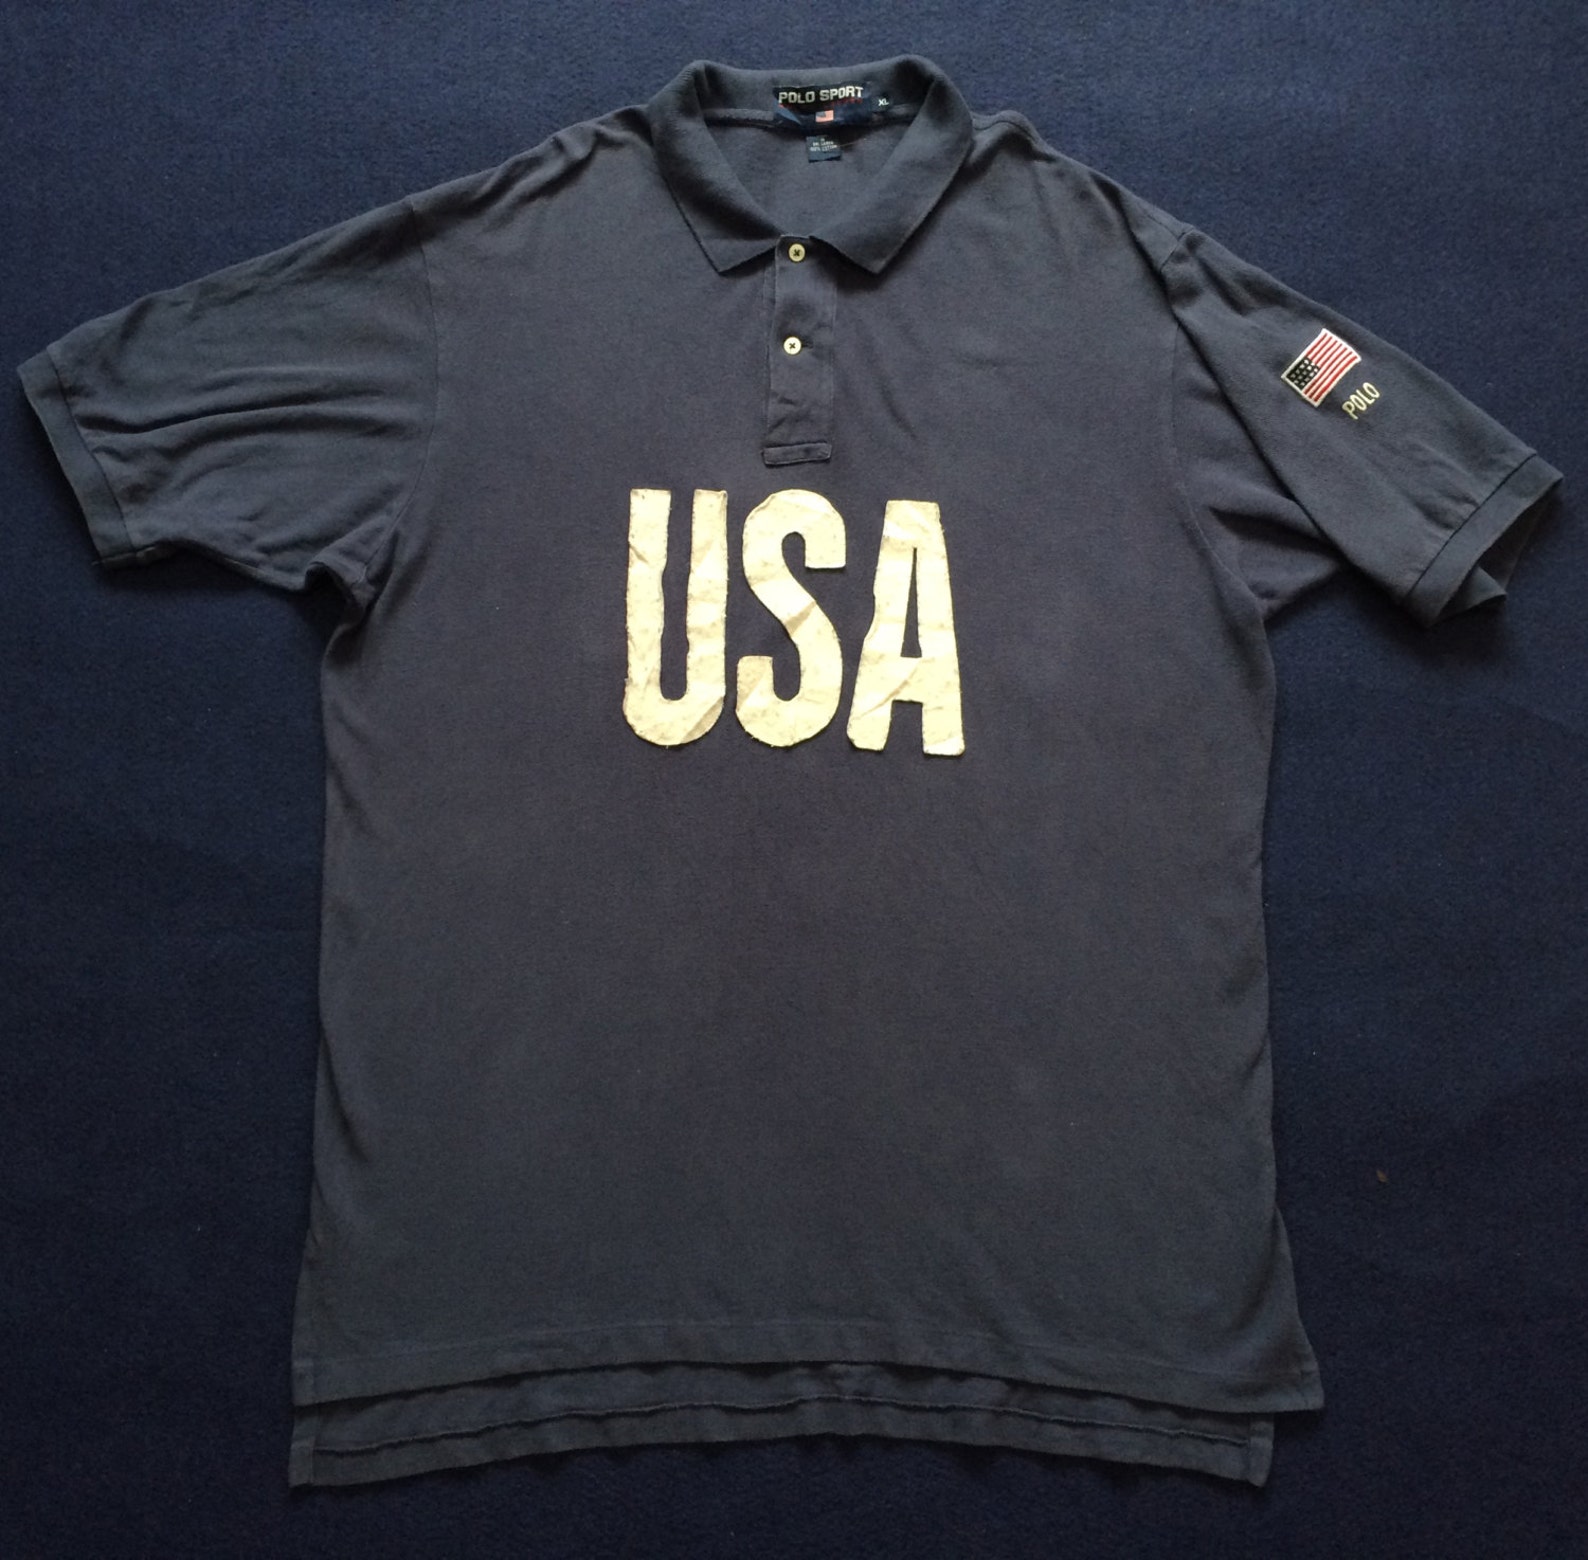 Vintage Polo Ralph Lauren USA Polo Sport Rugby 90s Short Sleeve Shirt ...